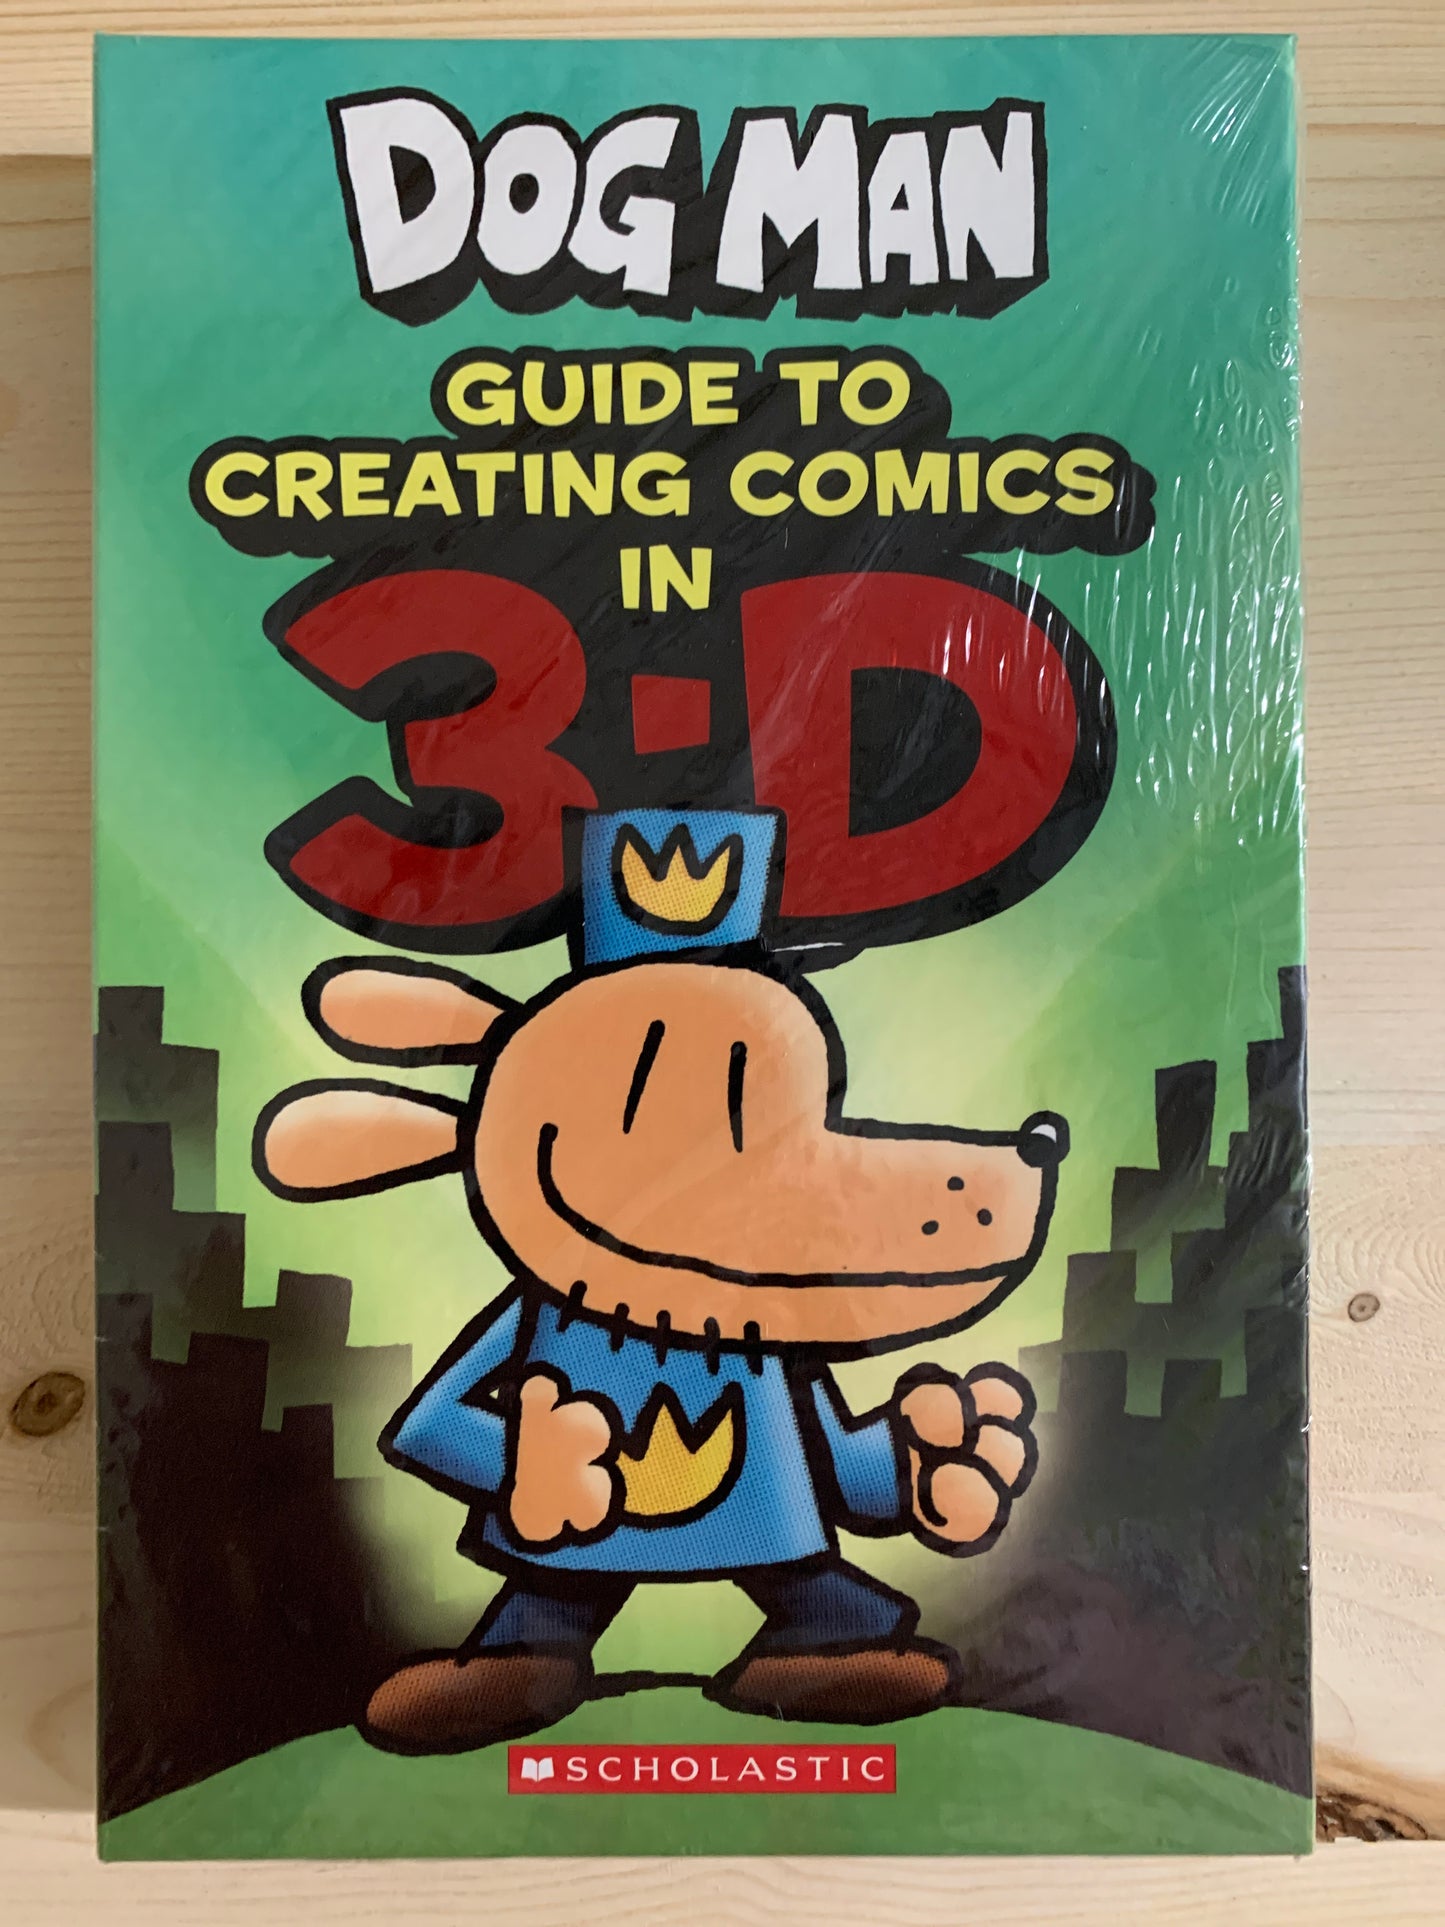 Dog Man: Guide to Creating Comics in 3D